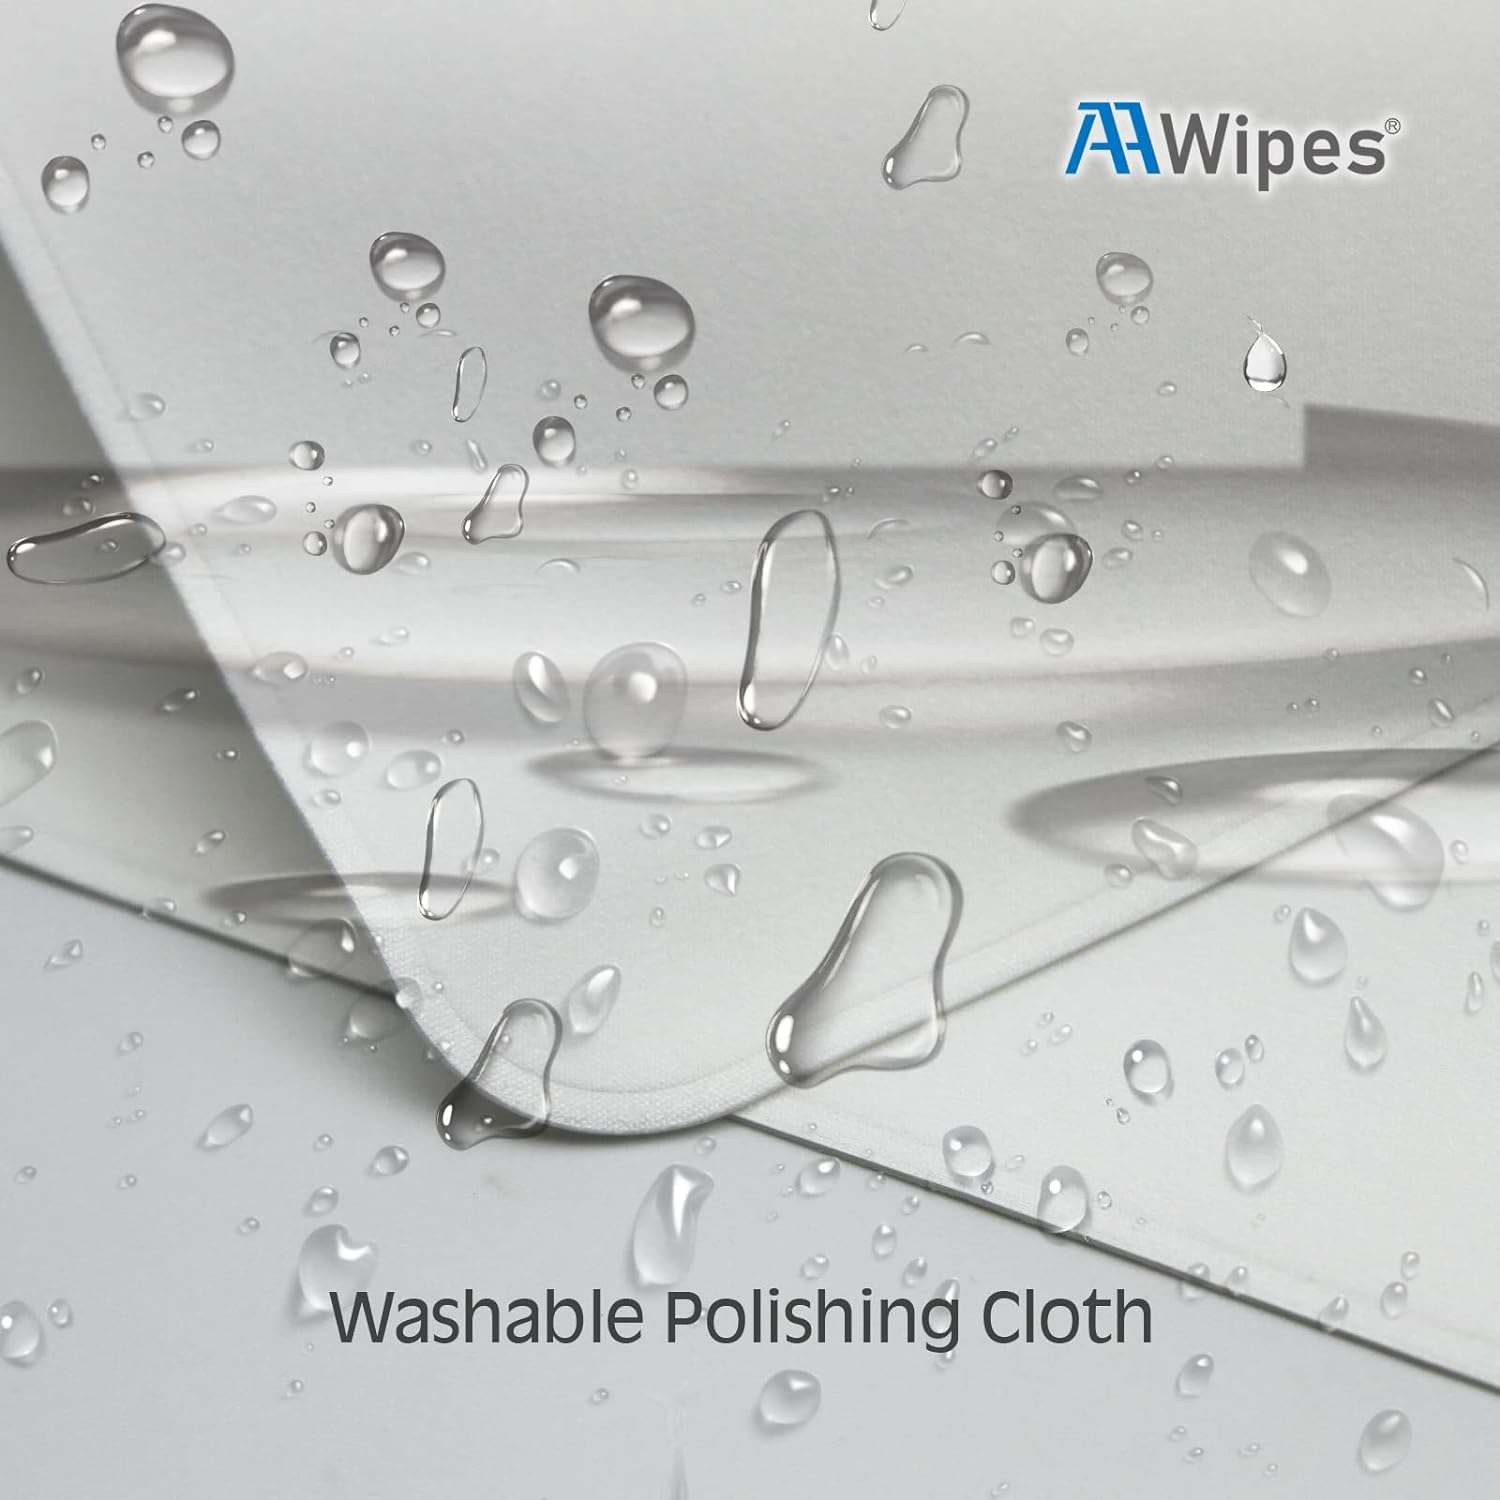 washable polishing cloth for apple devices